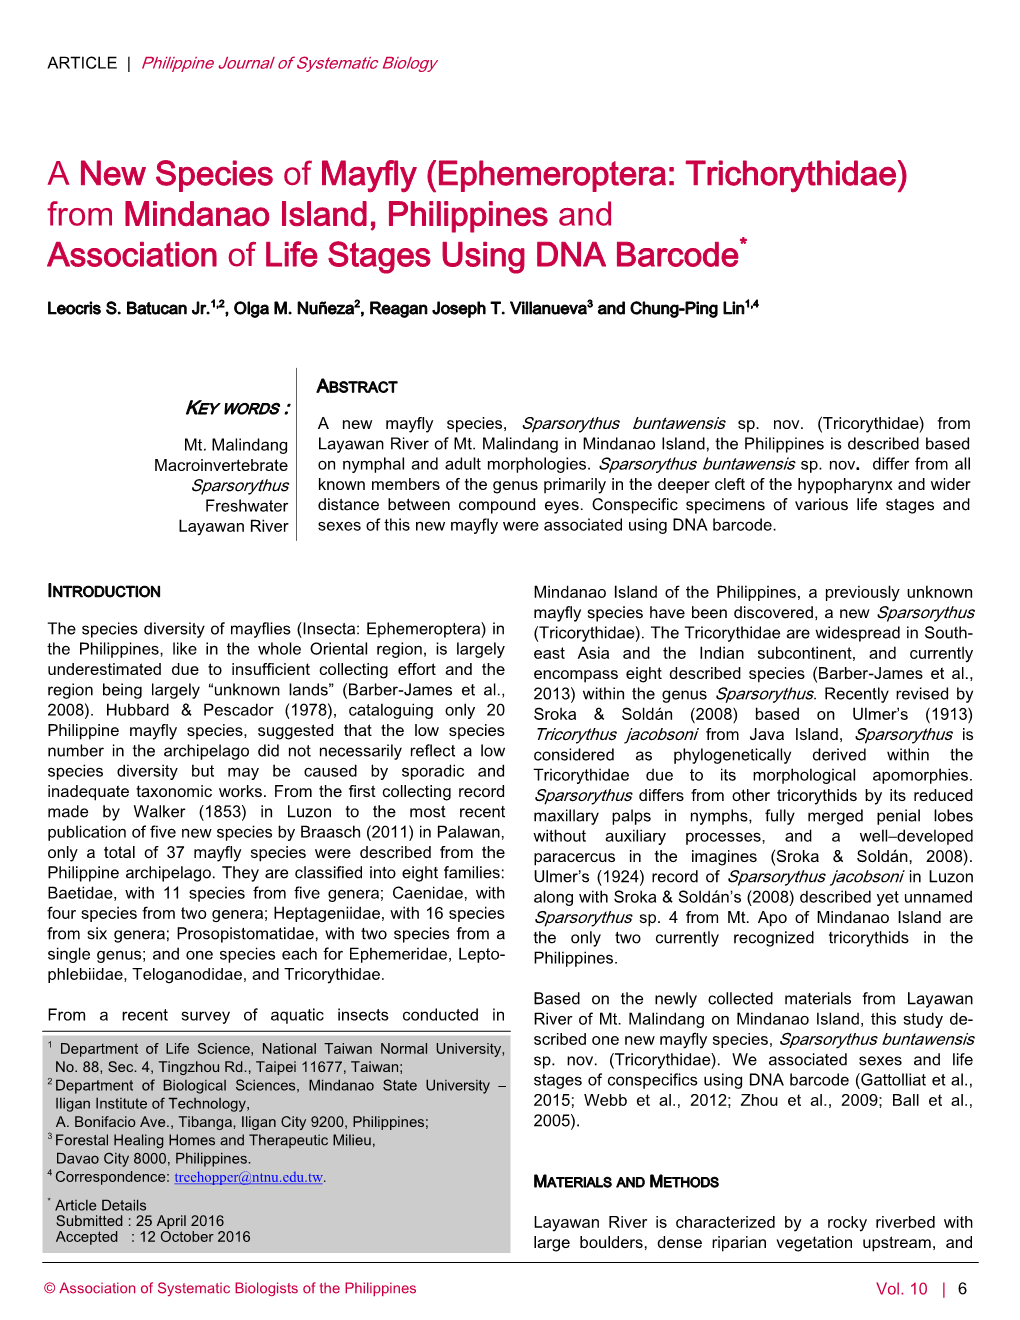 A New Species of Mayfly (Ephemeroptera: Trichorythidae) from Mindanao Island, Philippines and Association of Life Stages Using DNA Barcode*